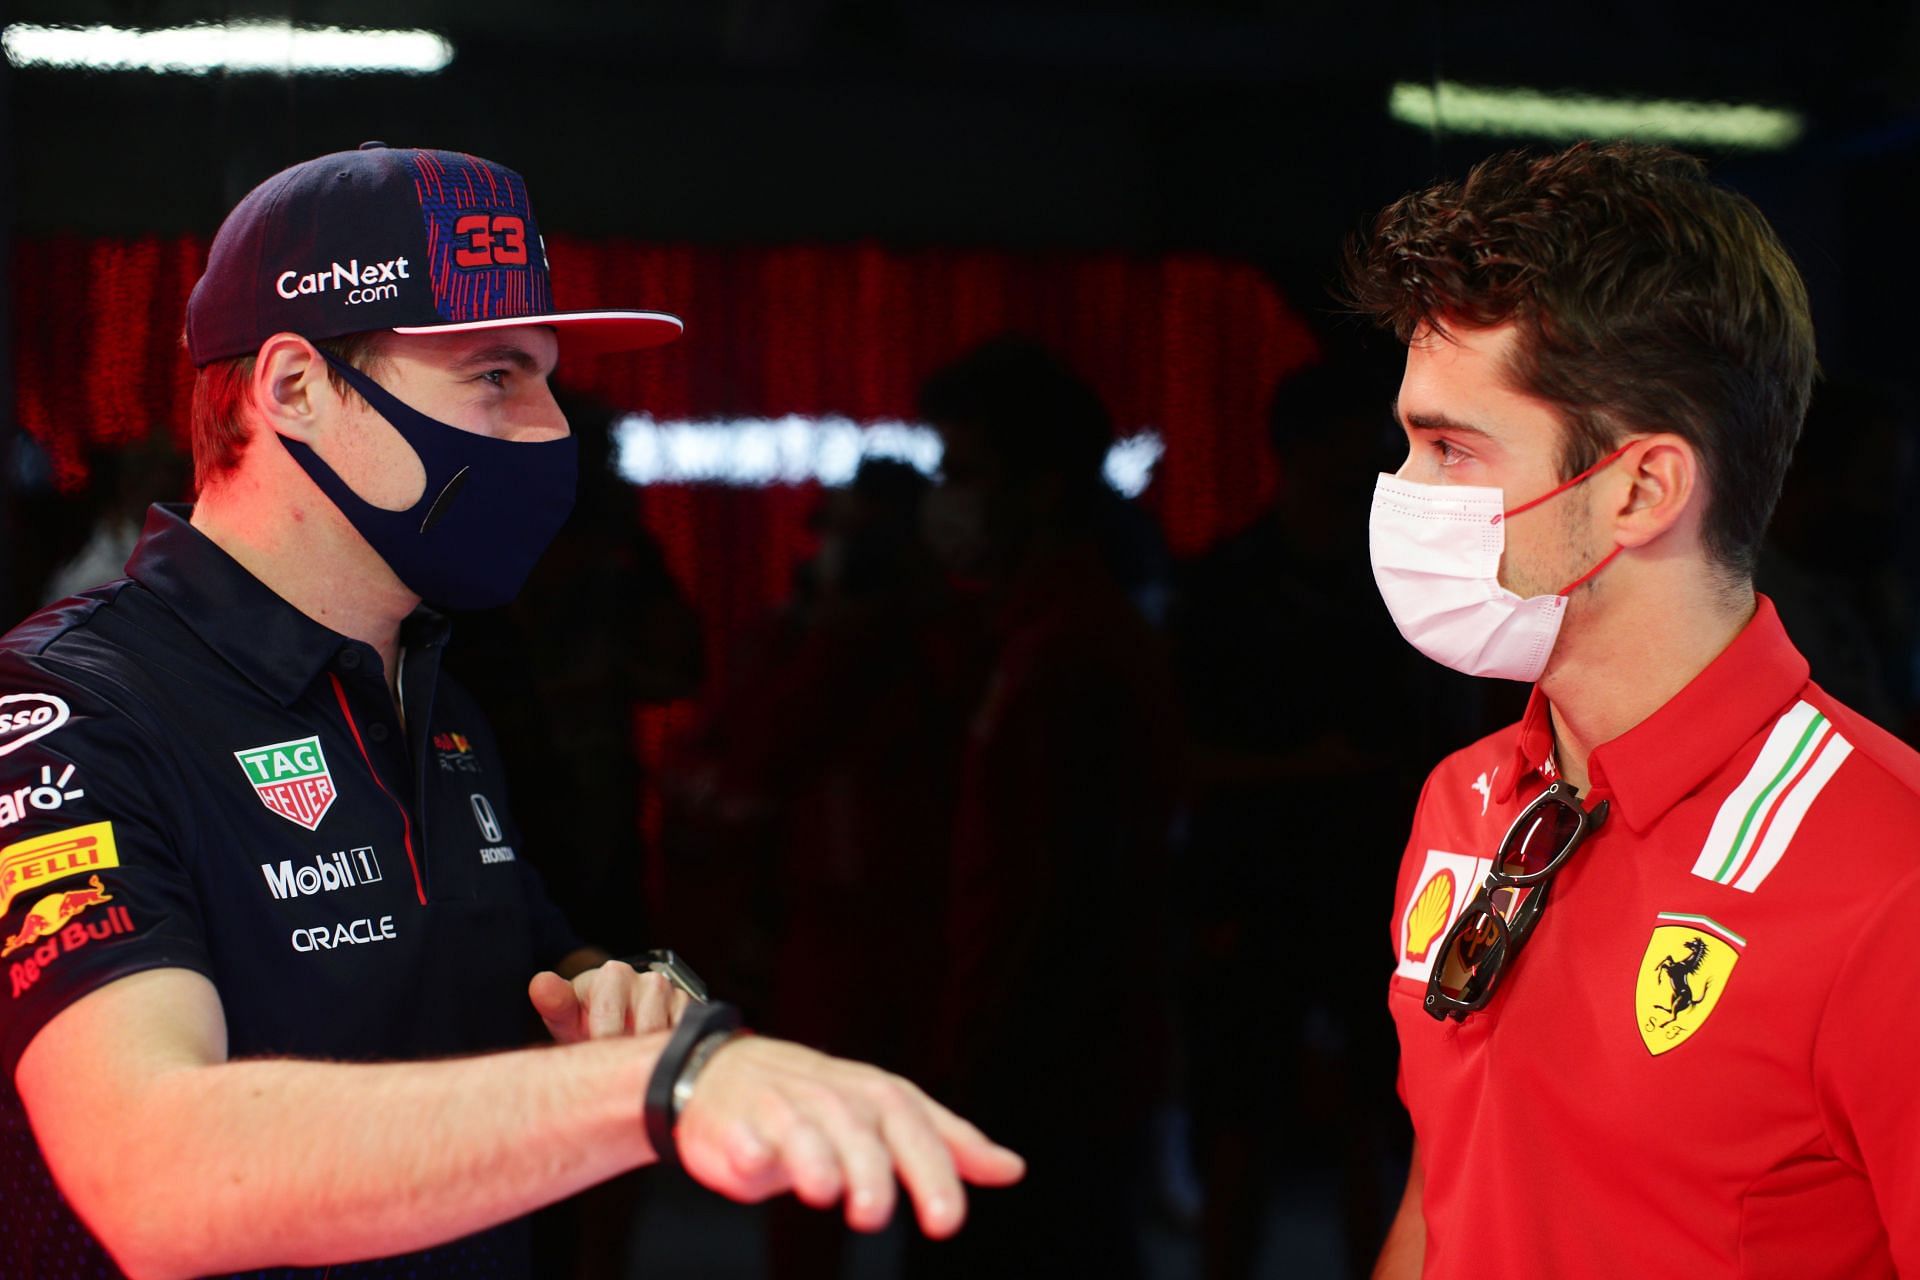 Max Verstappen (left) and Charles Leclerc (right) chatting in the F1 paddock  (Photo by Peter Fox/Getty Images)